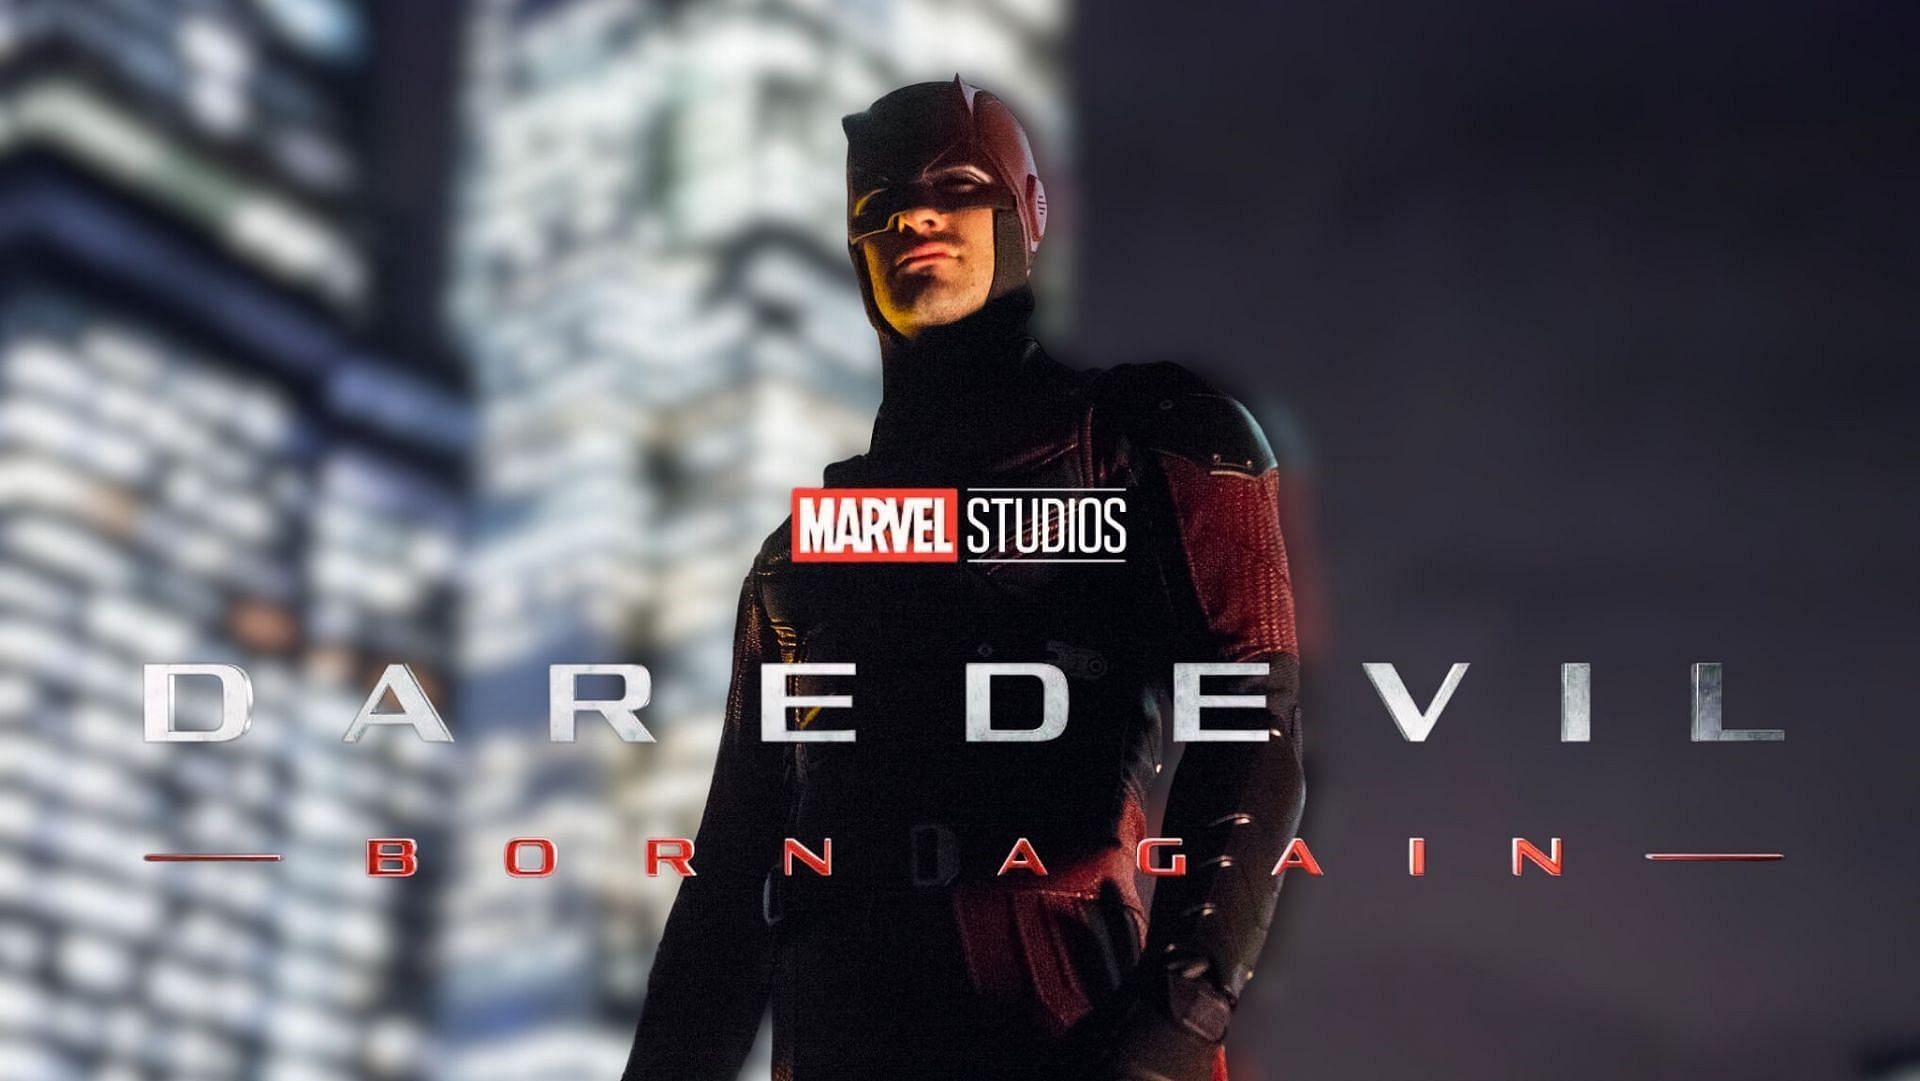 Daredevil: Born Again is one of the most anticipated Marvel projects in recent memory. (Image Via Sportskeeda)